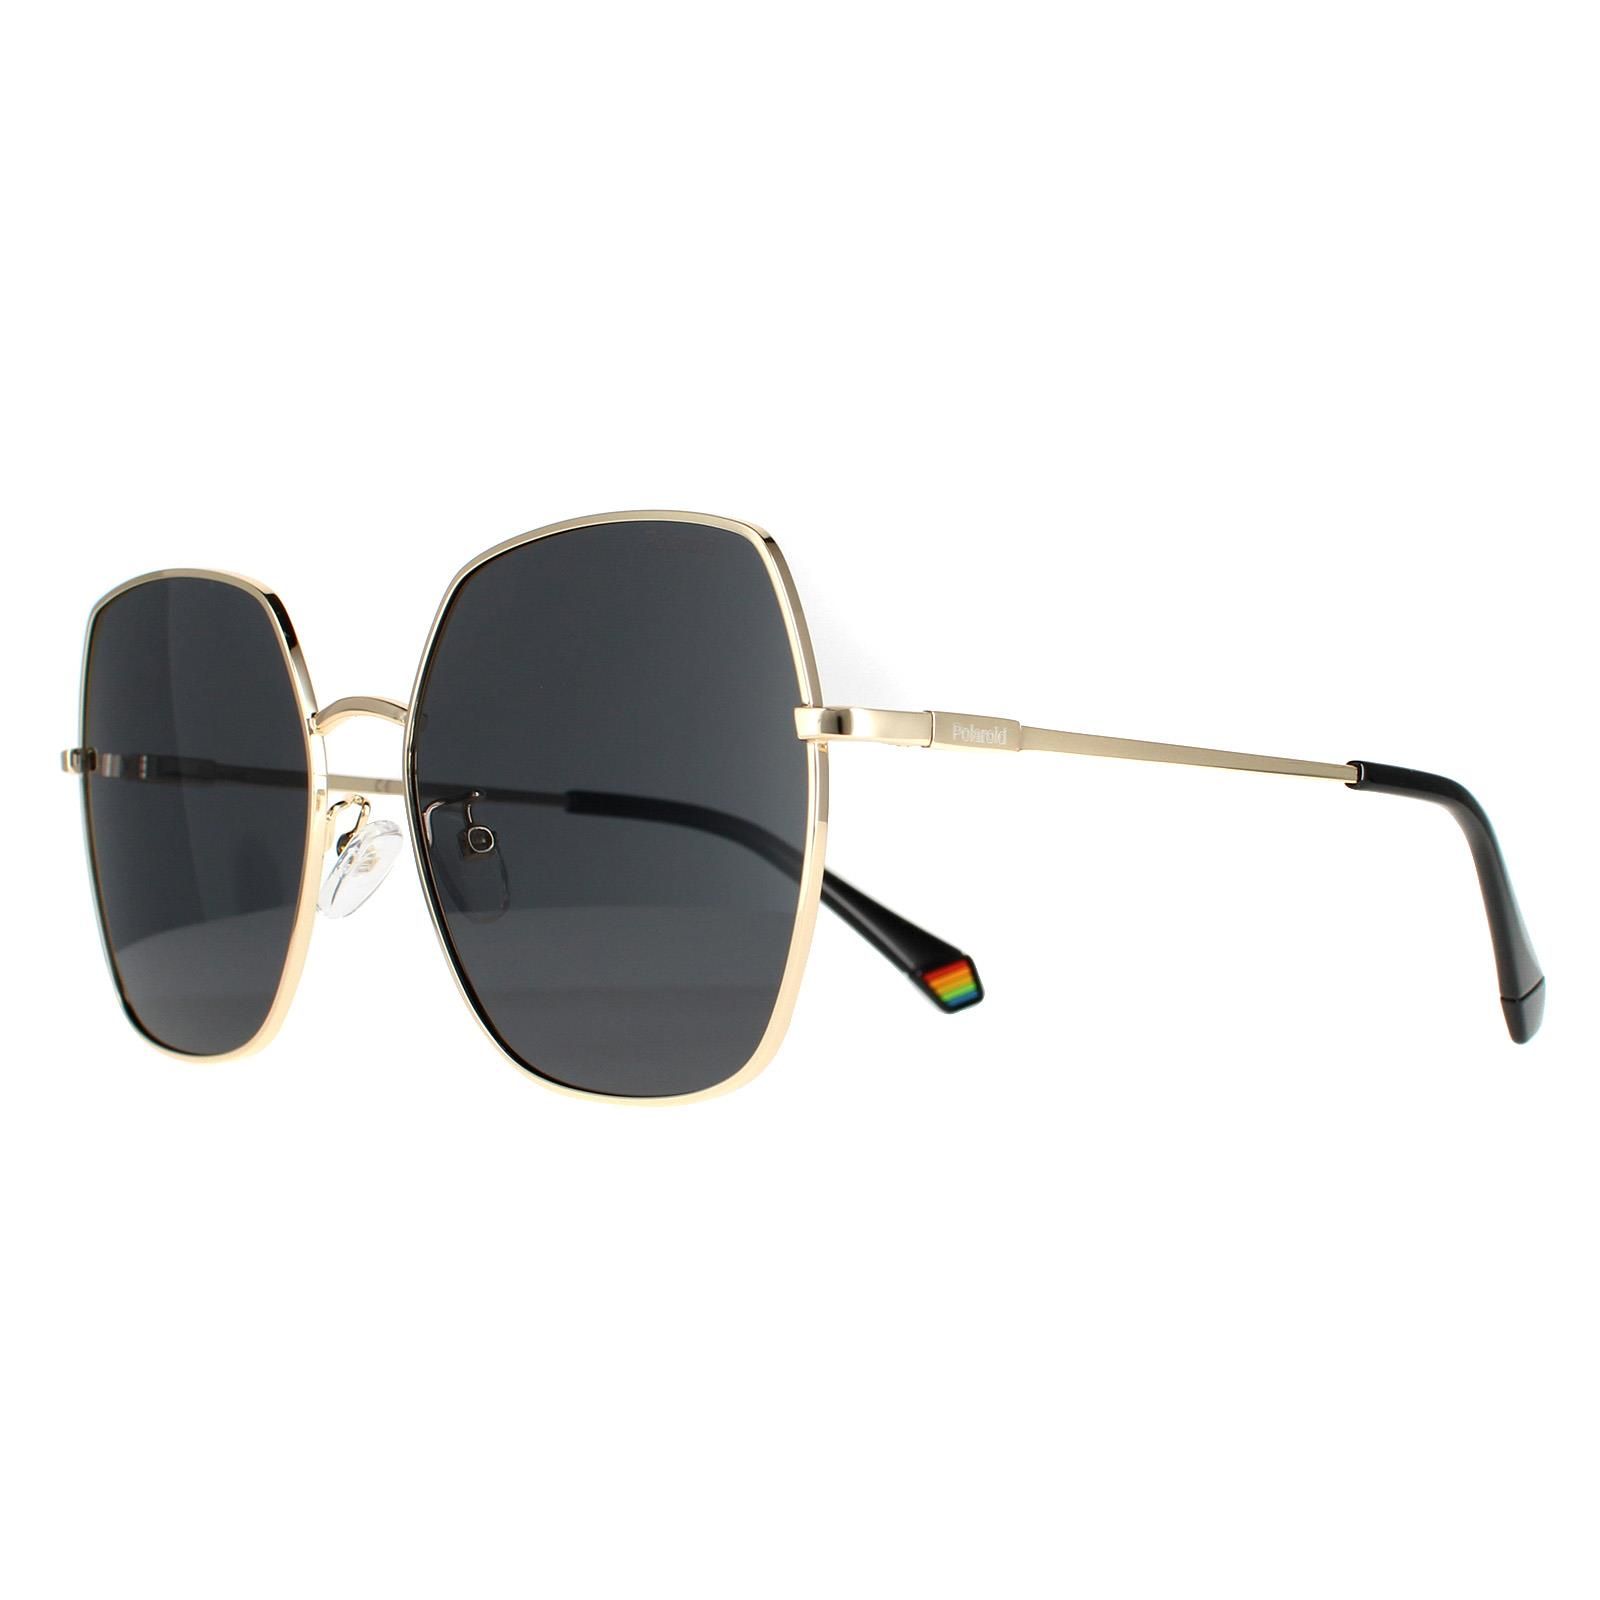 Polaroid Round Womens Gold Black  Grey Polarized PLD 6178/G/S  Polaroid are a contemporary take on the hexagonal shape crafted from lightweight metal. Slender temples are embellished with the Polaroid logo while adjustable nose pads ensure a comfortable fit.